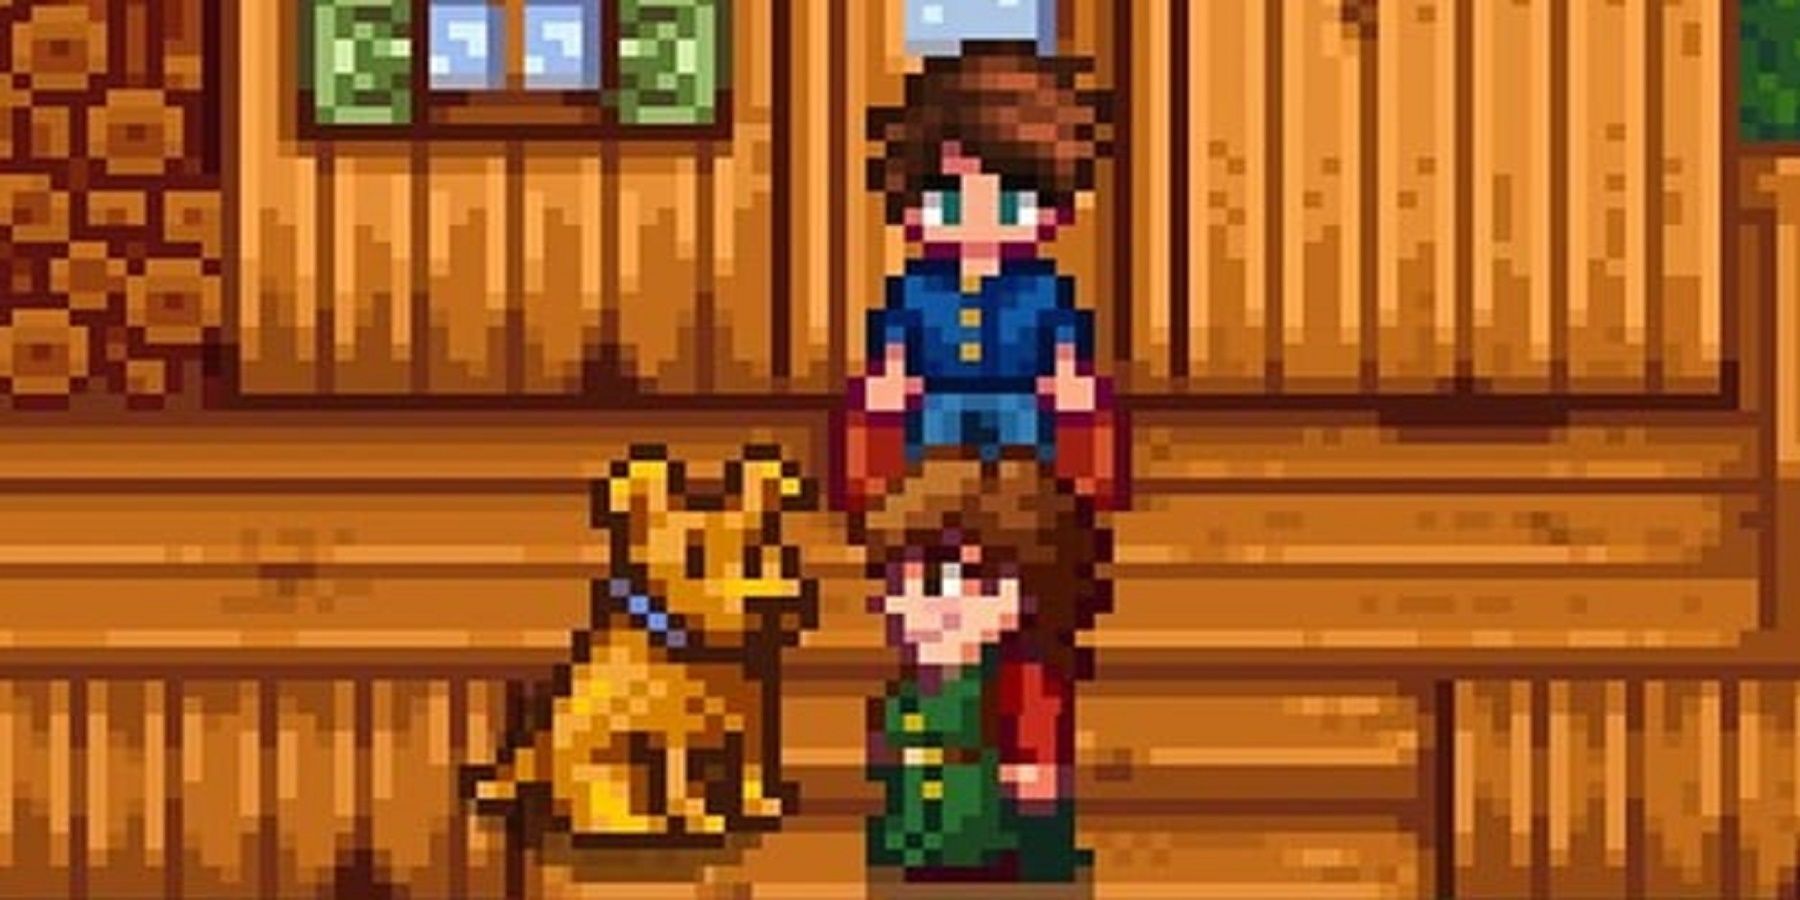 The farmer getting a pet dog from Marnie